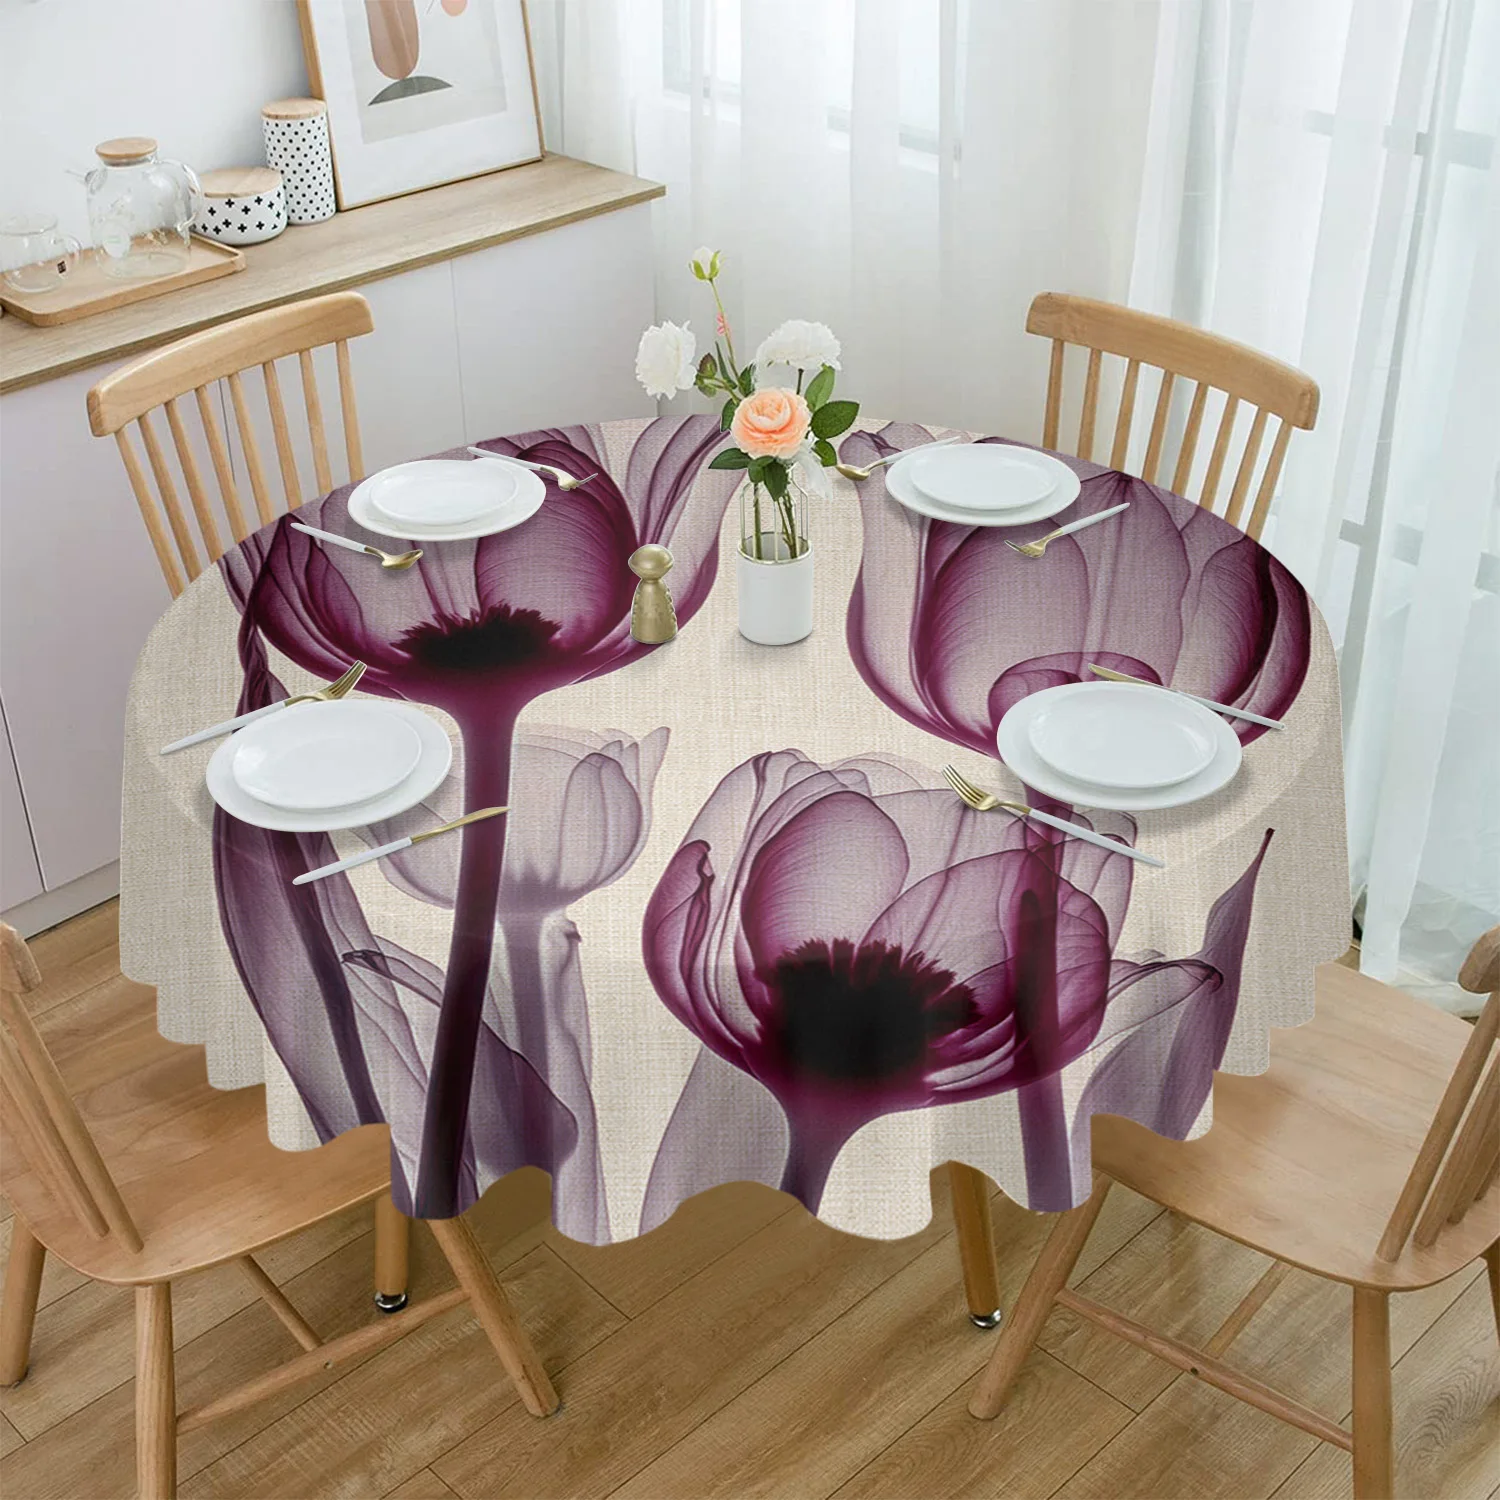 

Tulip Flower Abstract Round Tablecloth Party Kitchen Dinner Table Cover Holiday Decor Waterproof Tablecloths coffee picnic mat